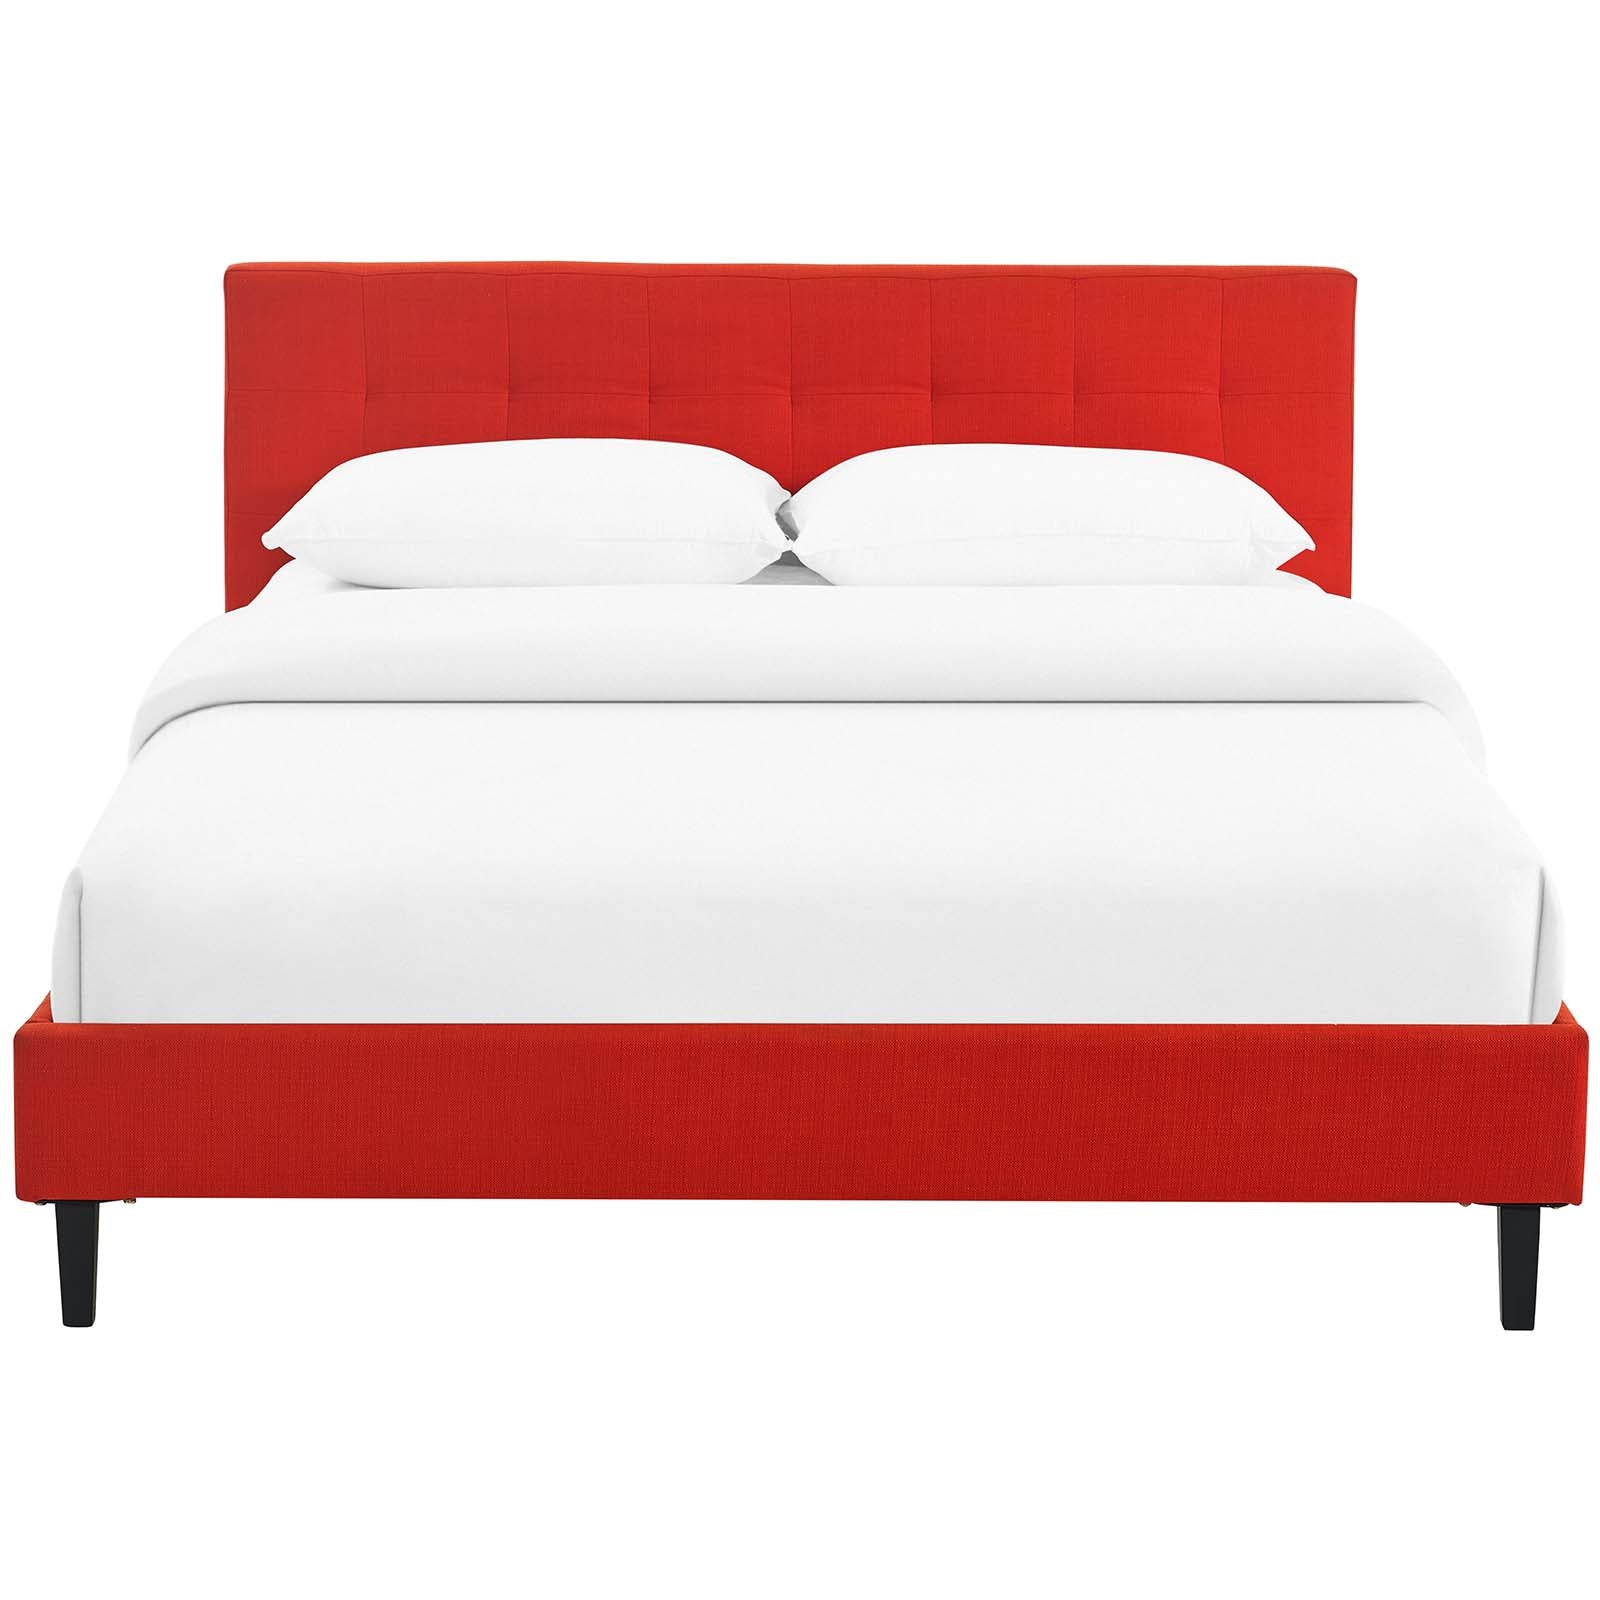 Modway Beds - Linnea Full Bed Atomic Red